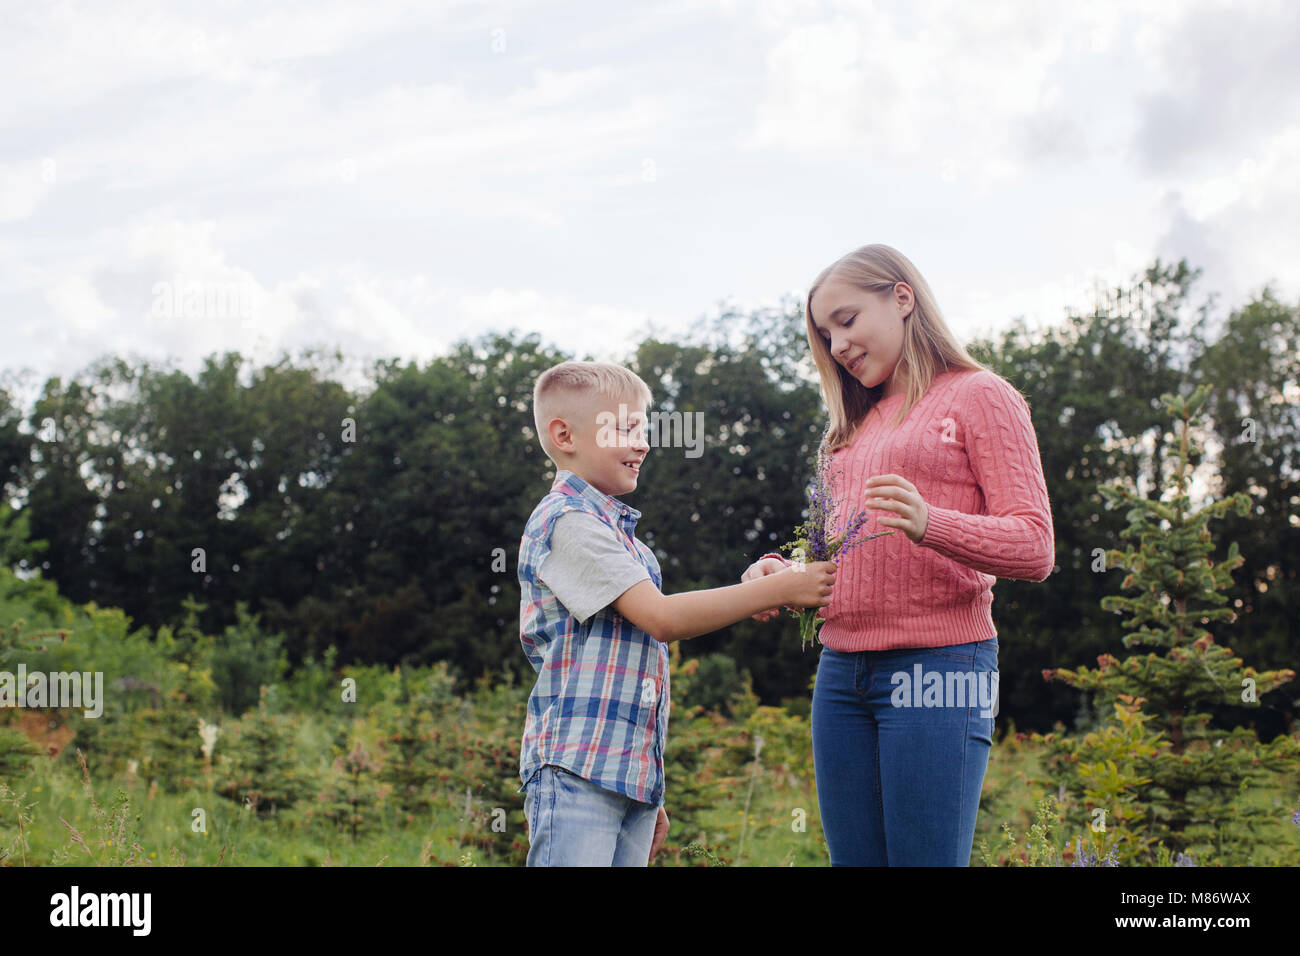 Boy giving a girl freshly picked flowers in a meadow Stock Photo